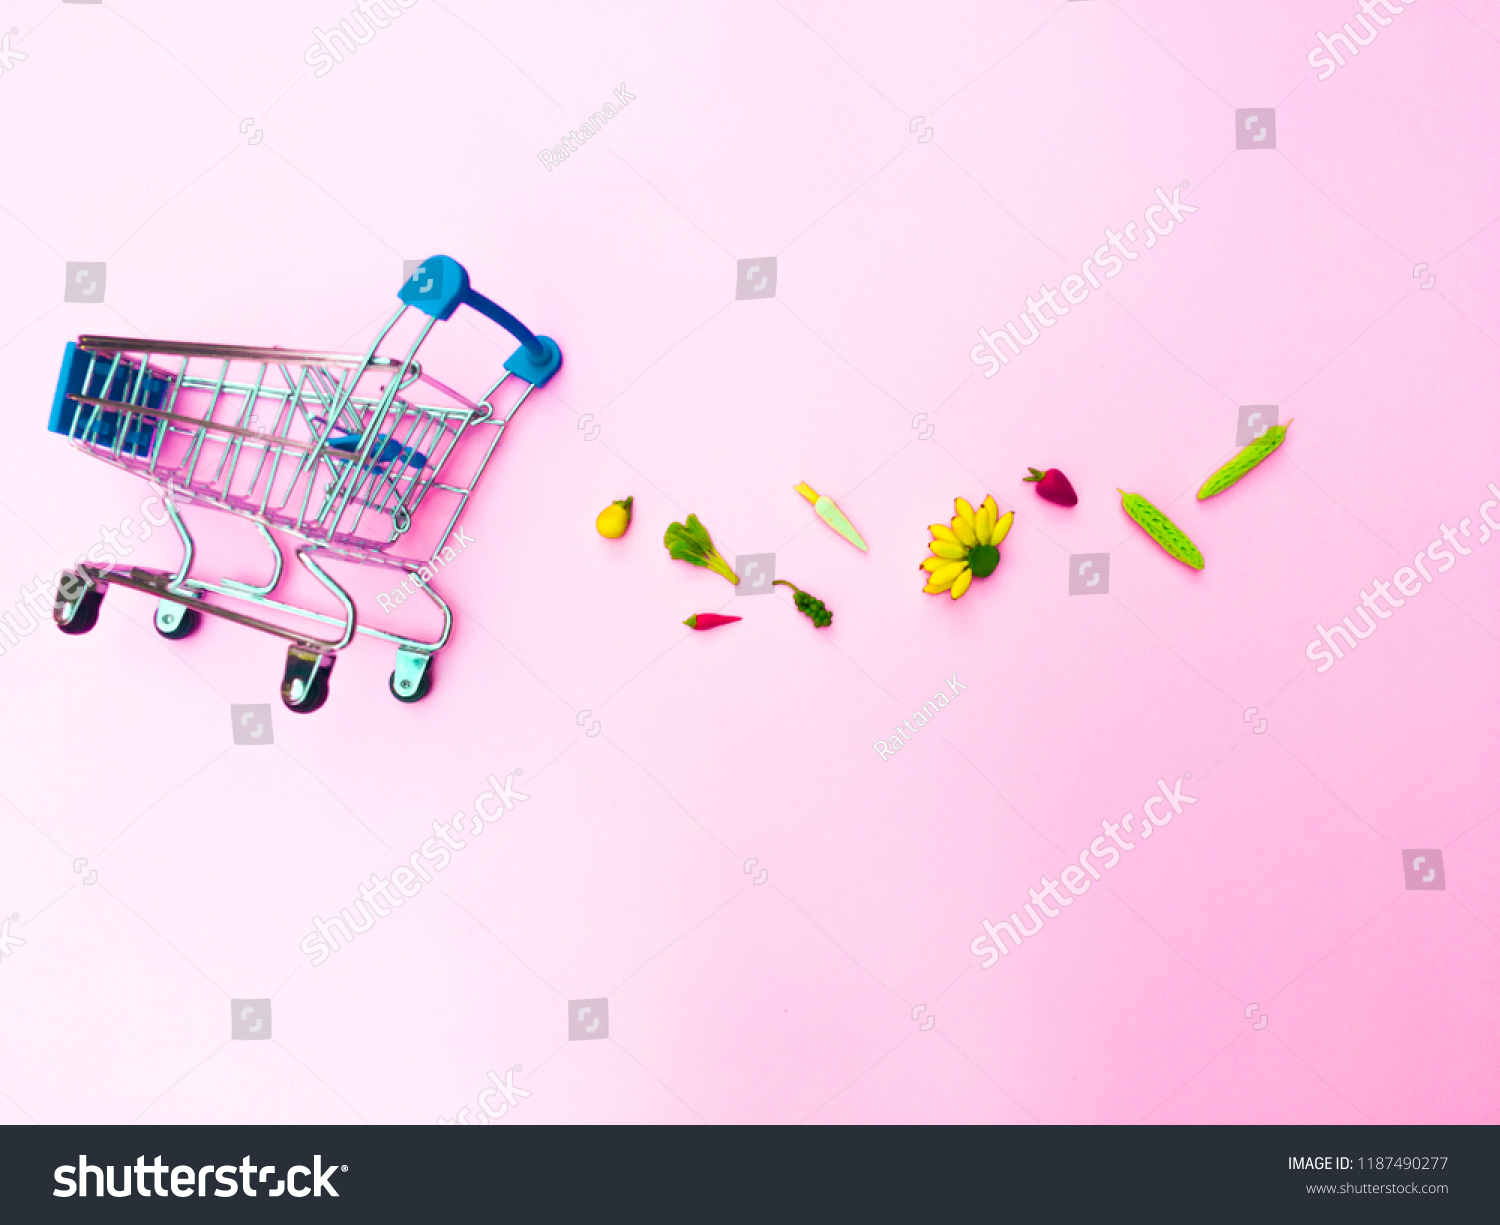 Ideas Online Shopping Pink Background Shopping Stock Photo Edit Now 1187490277